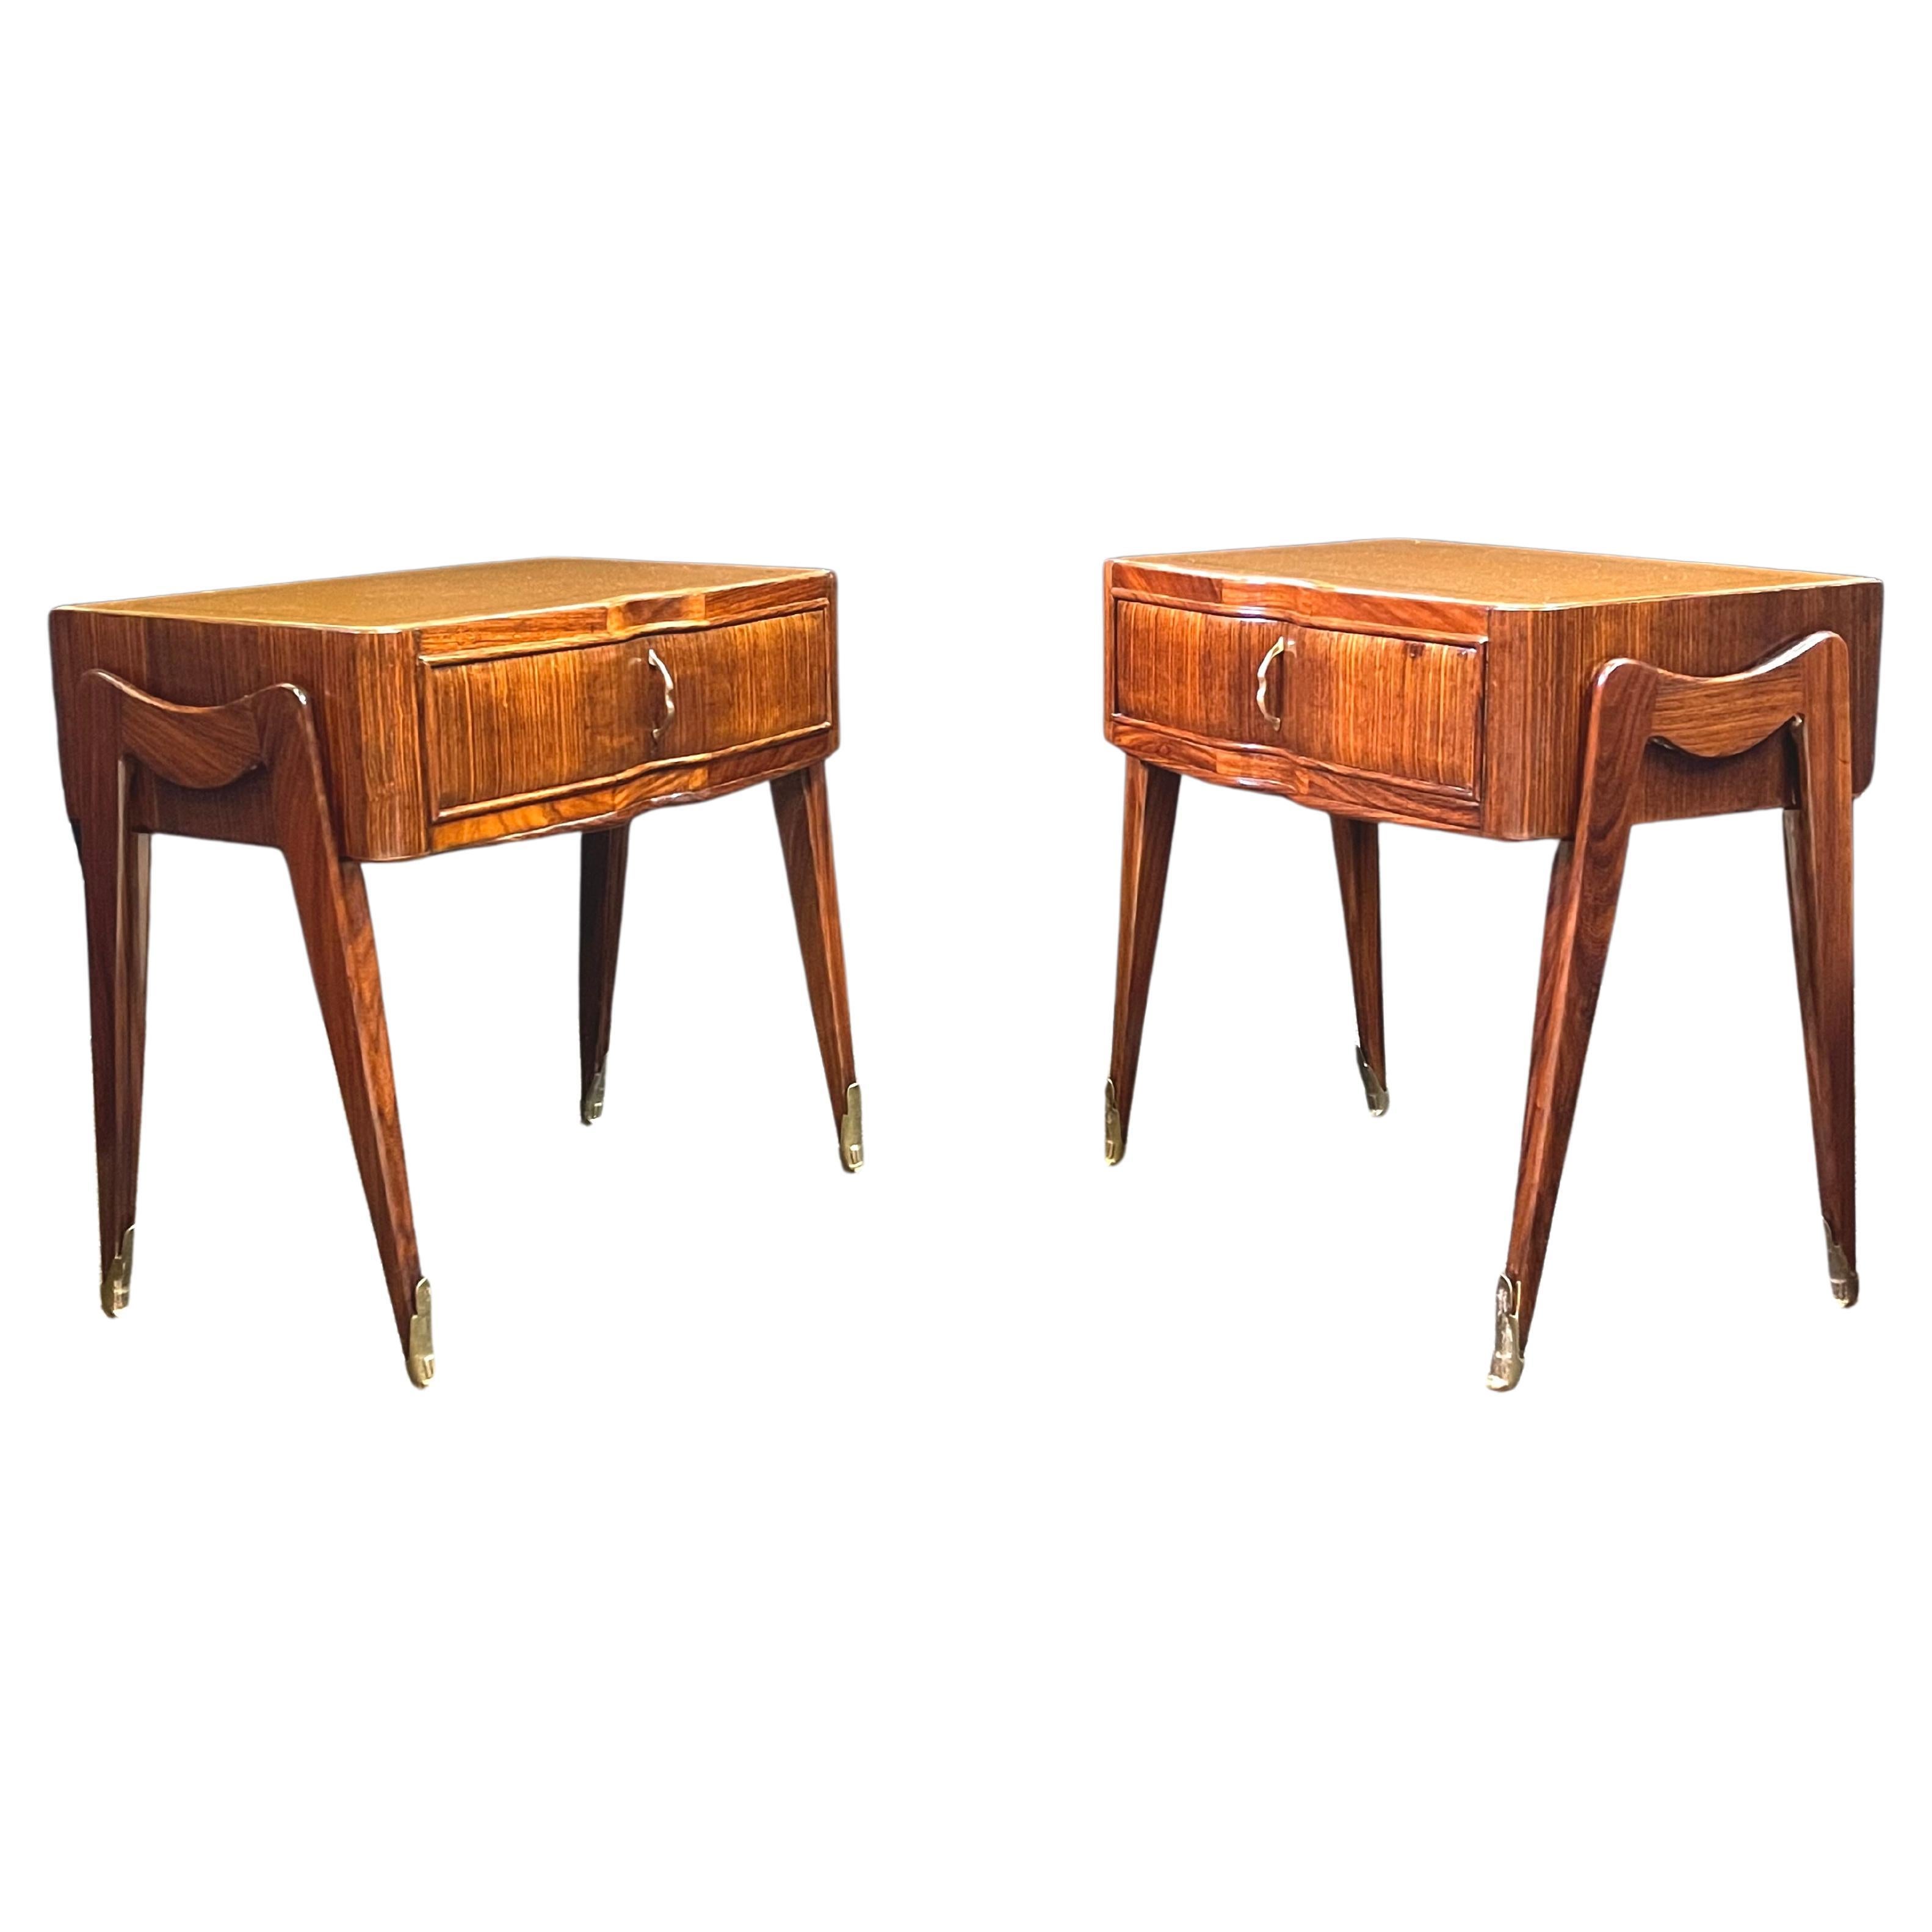 Italian Midcentury Modern Bedside Tables by Vittorio Dassi For Sale